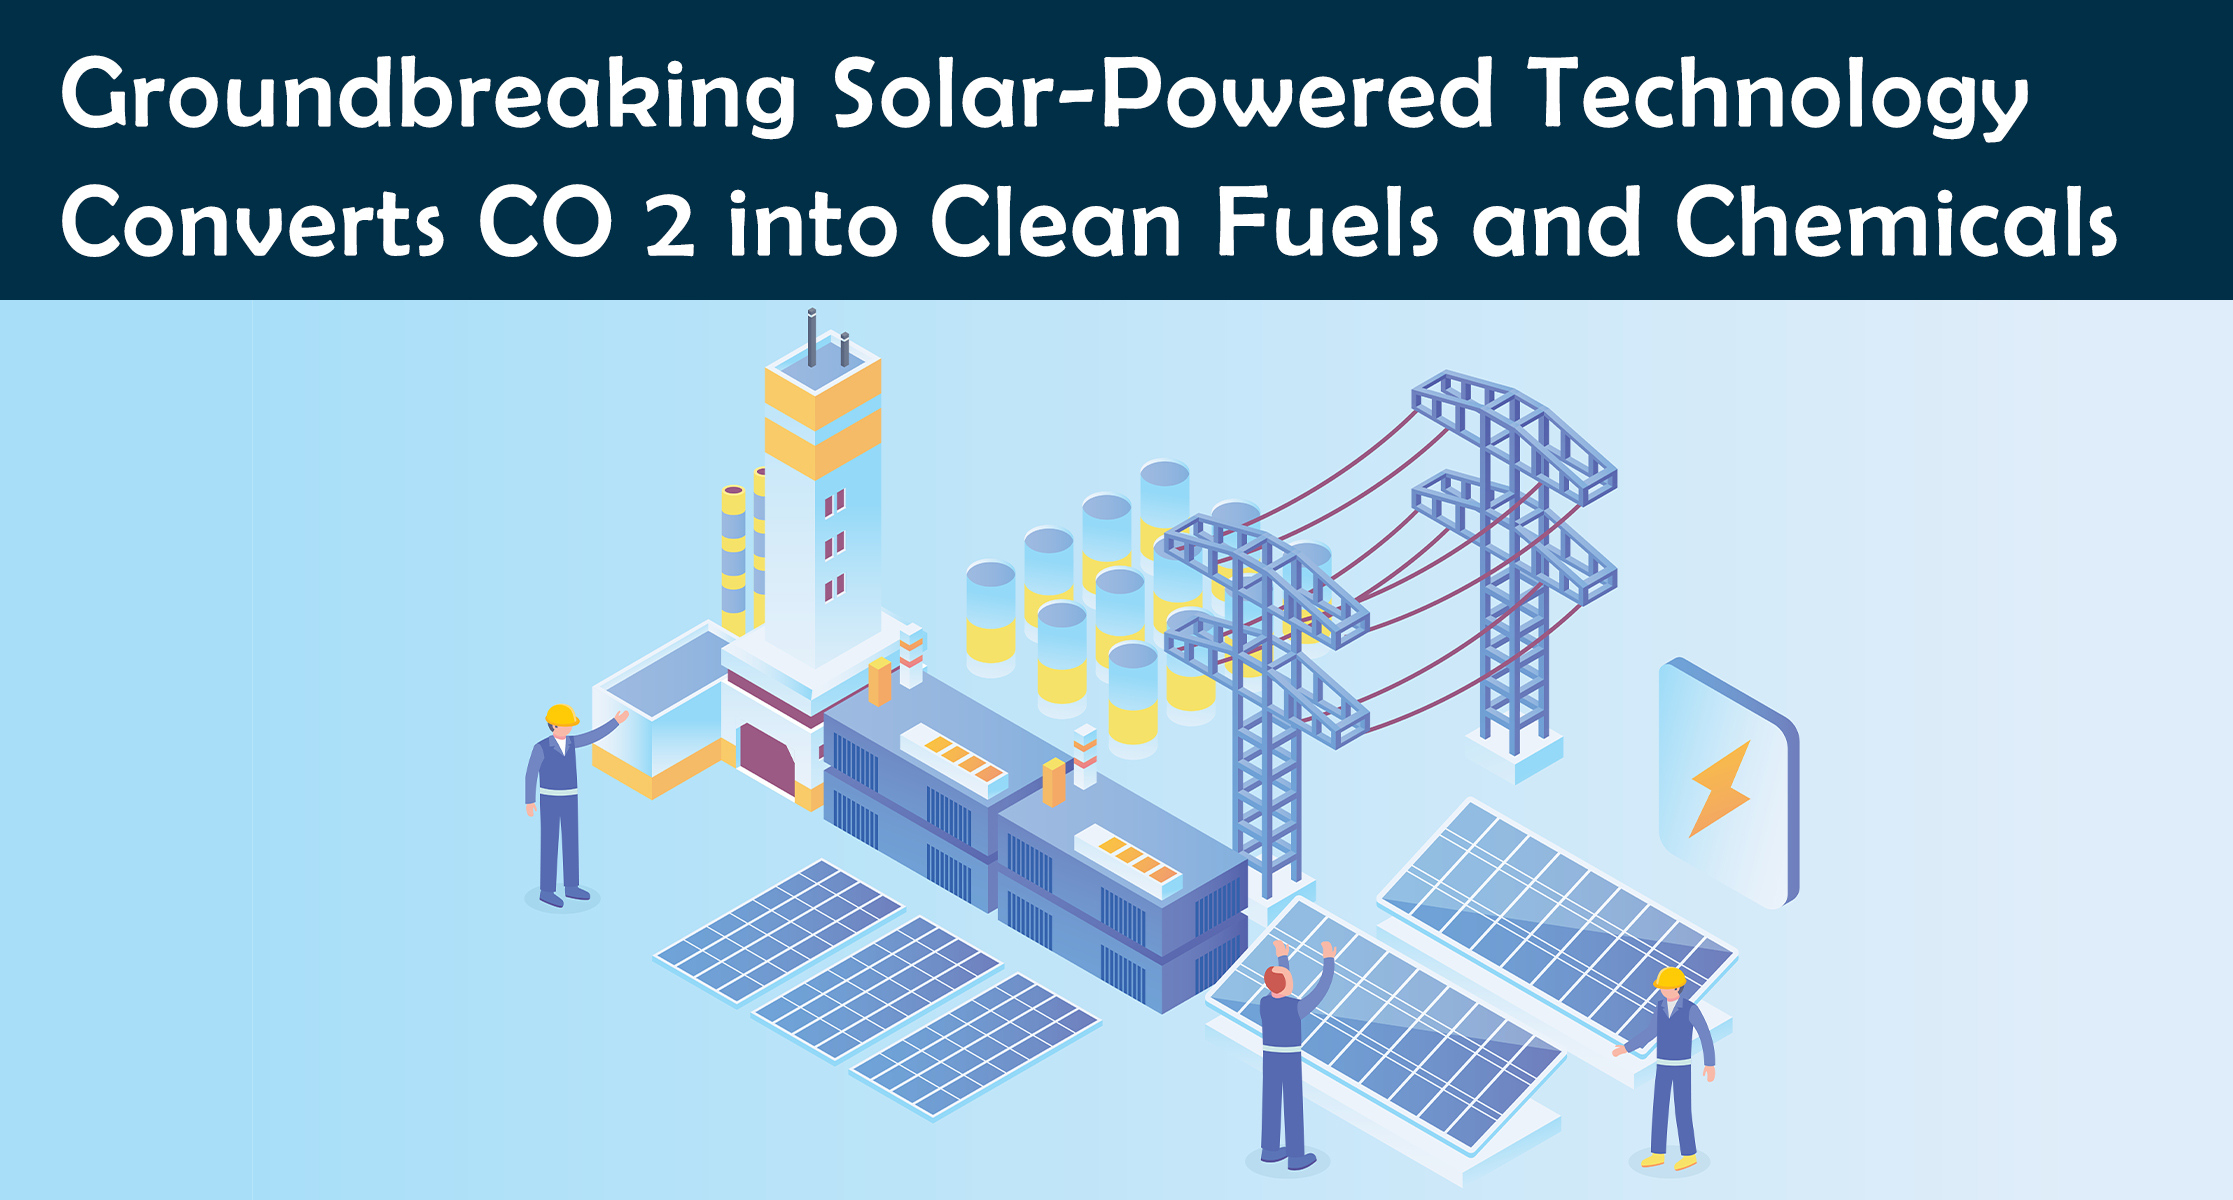 Groundbreaking Solar-Powered Technology Converts CO2 into Clean Fuels and Chemicals